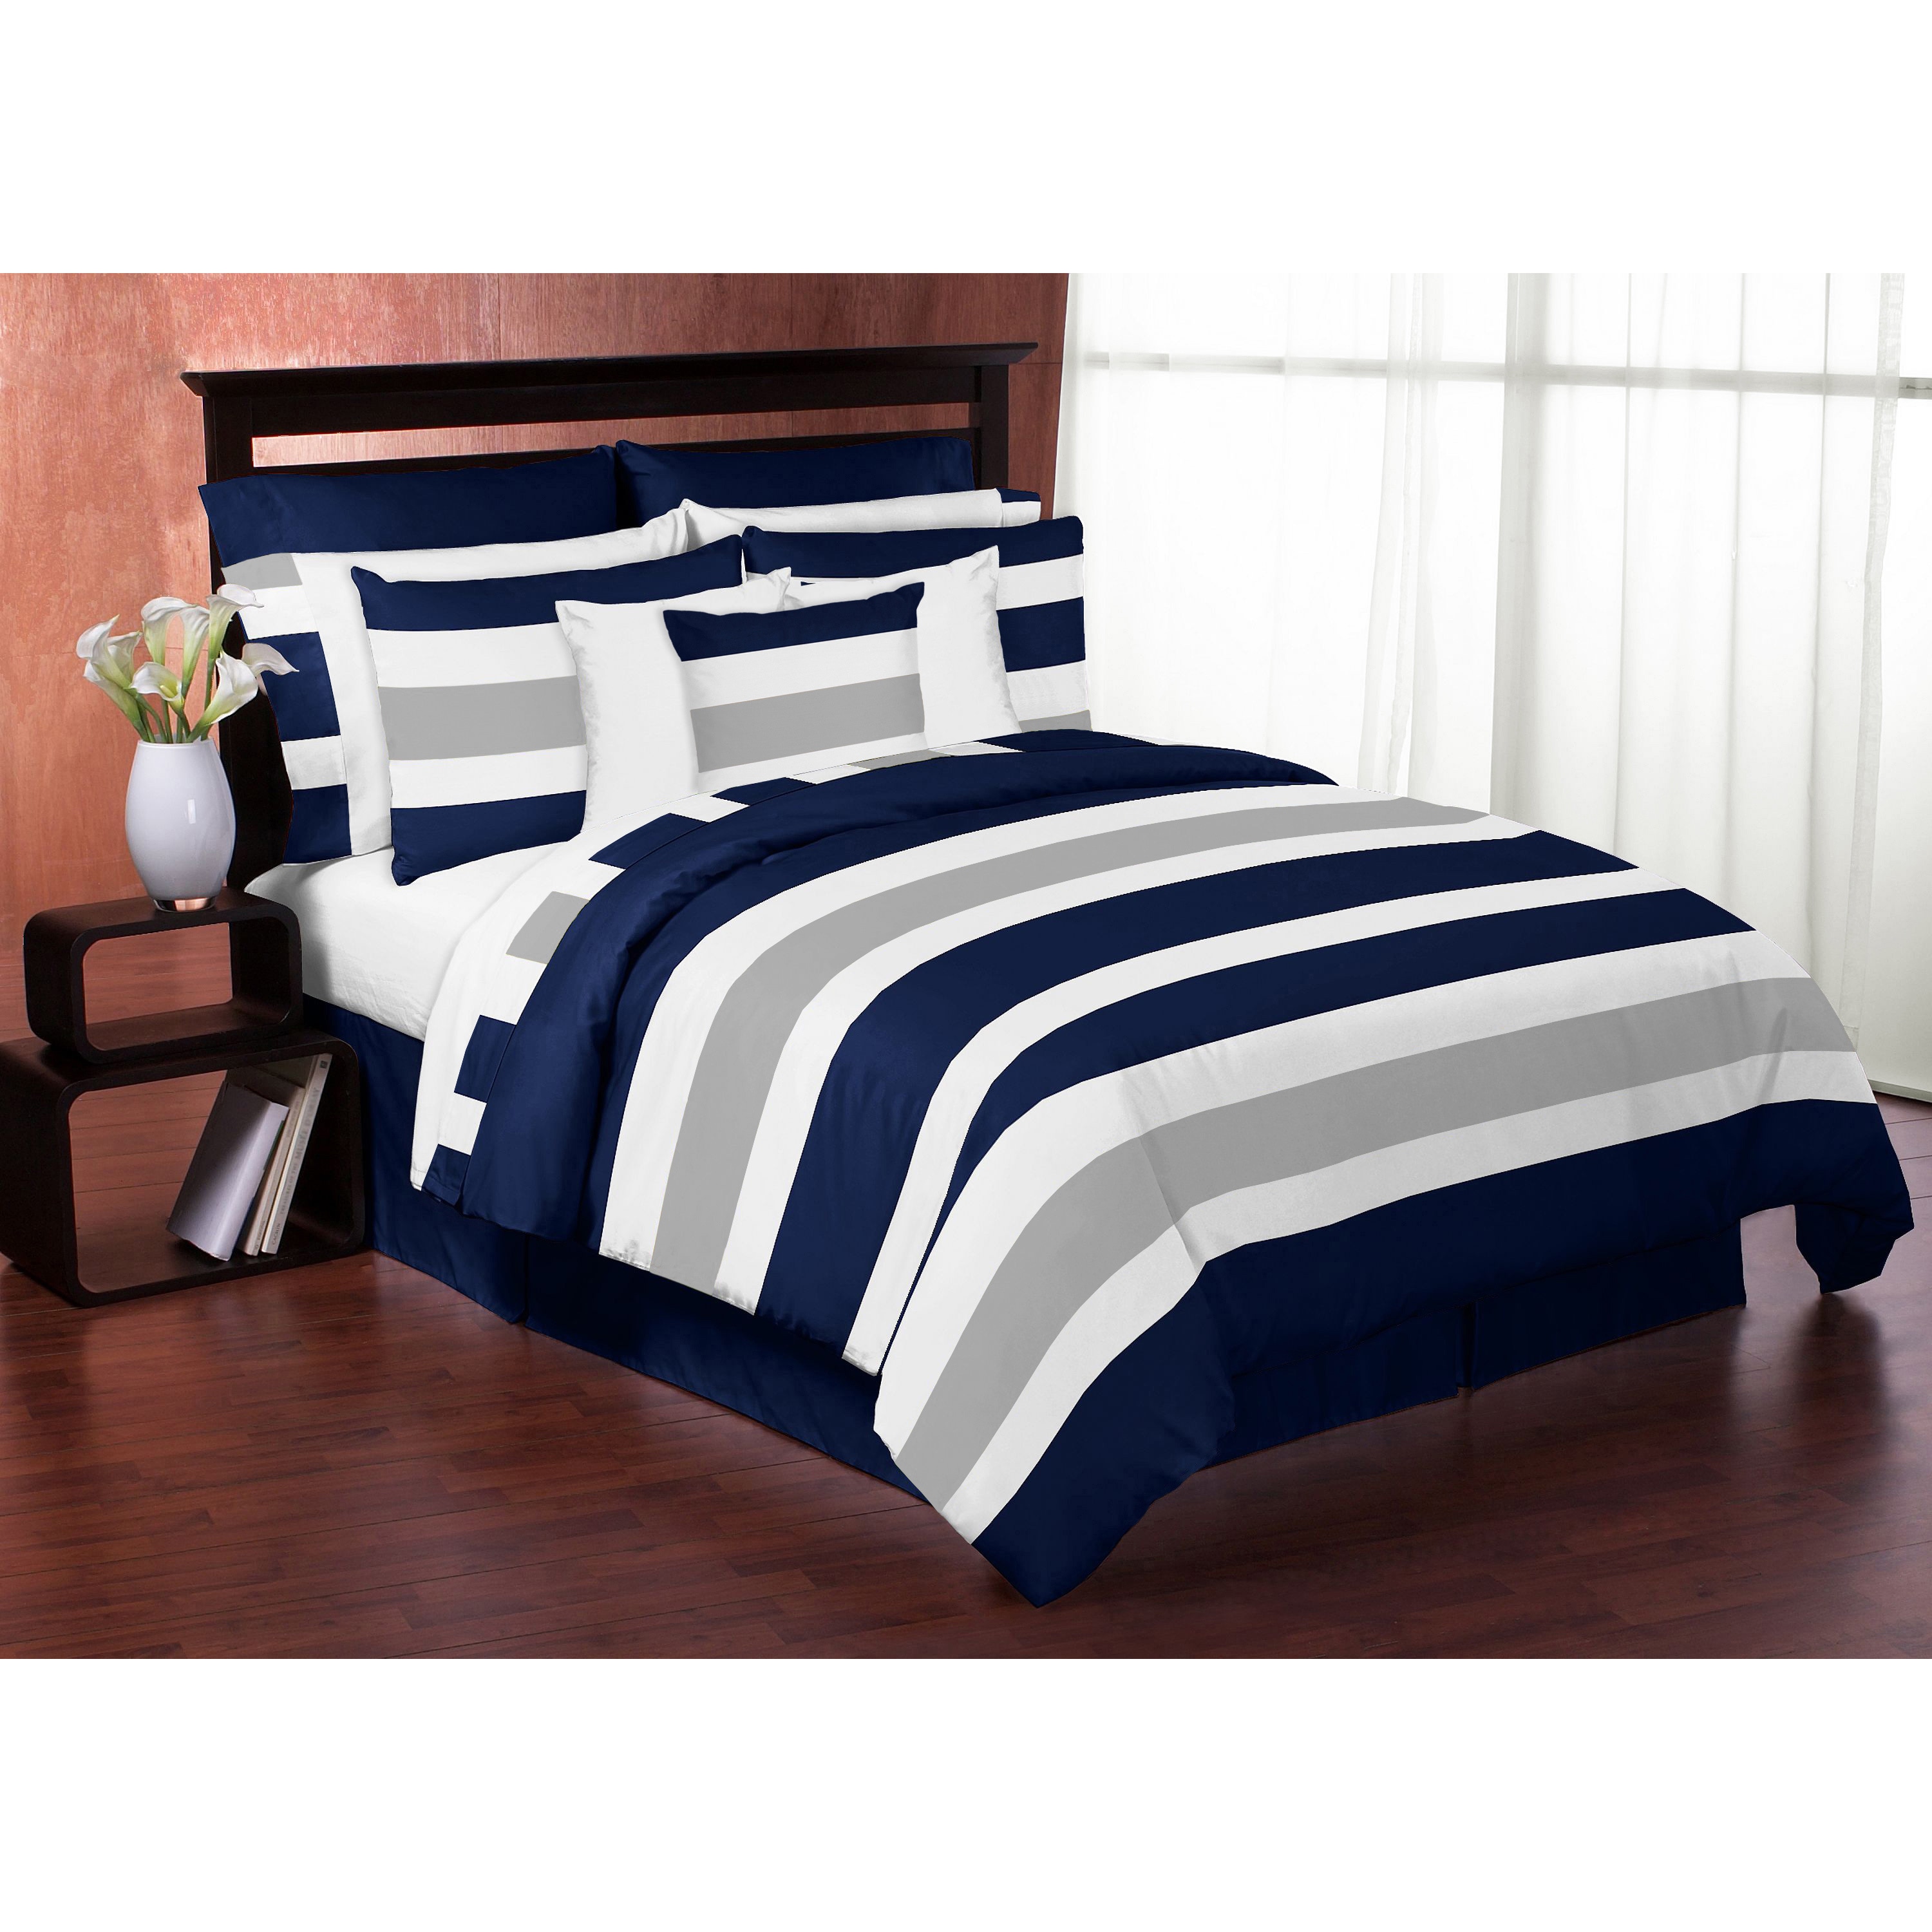 bedding for queen size bed